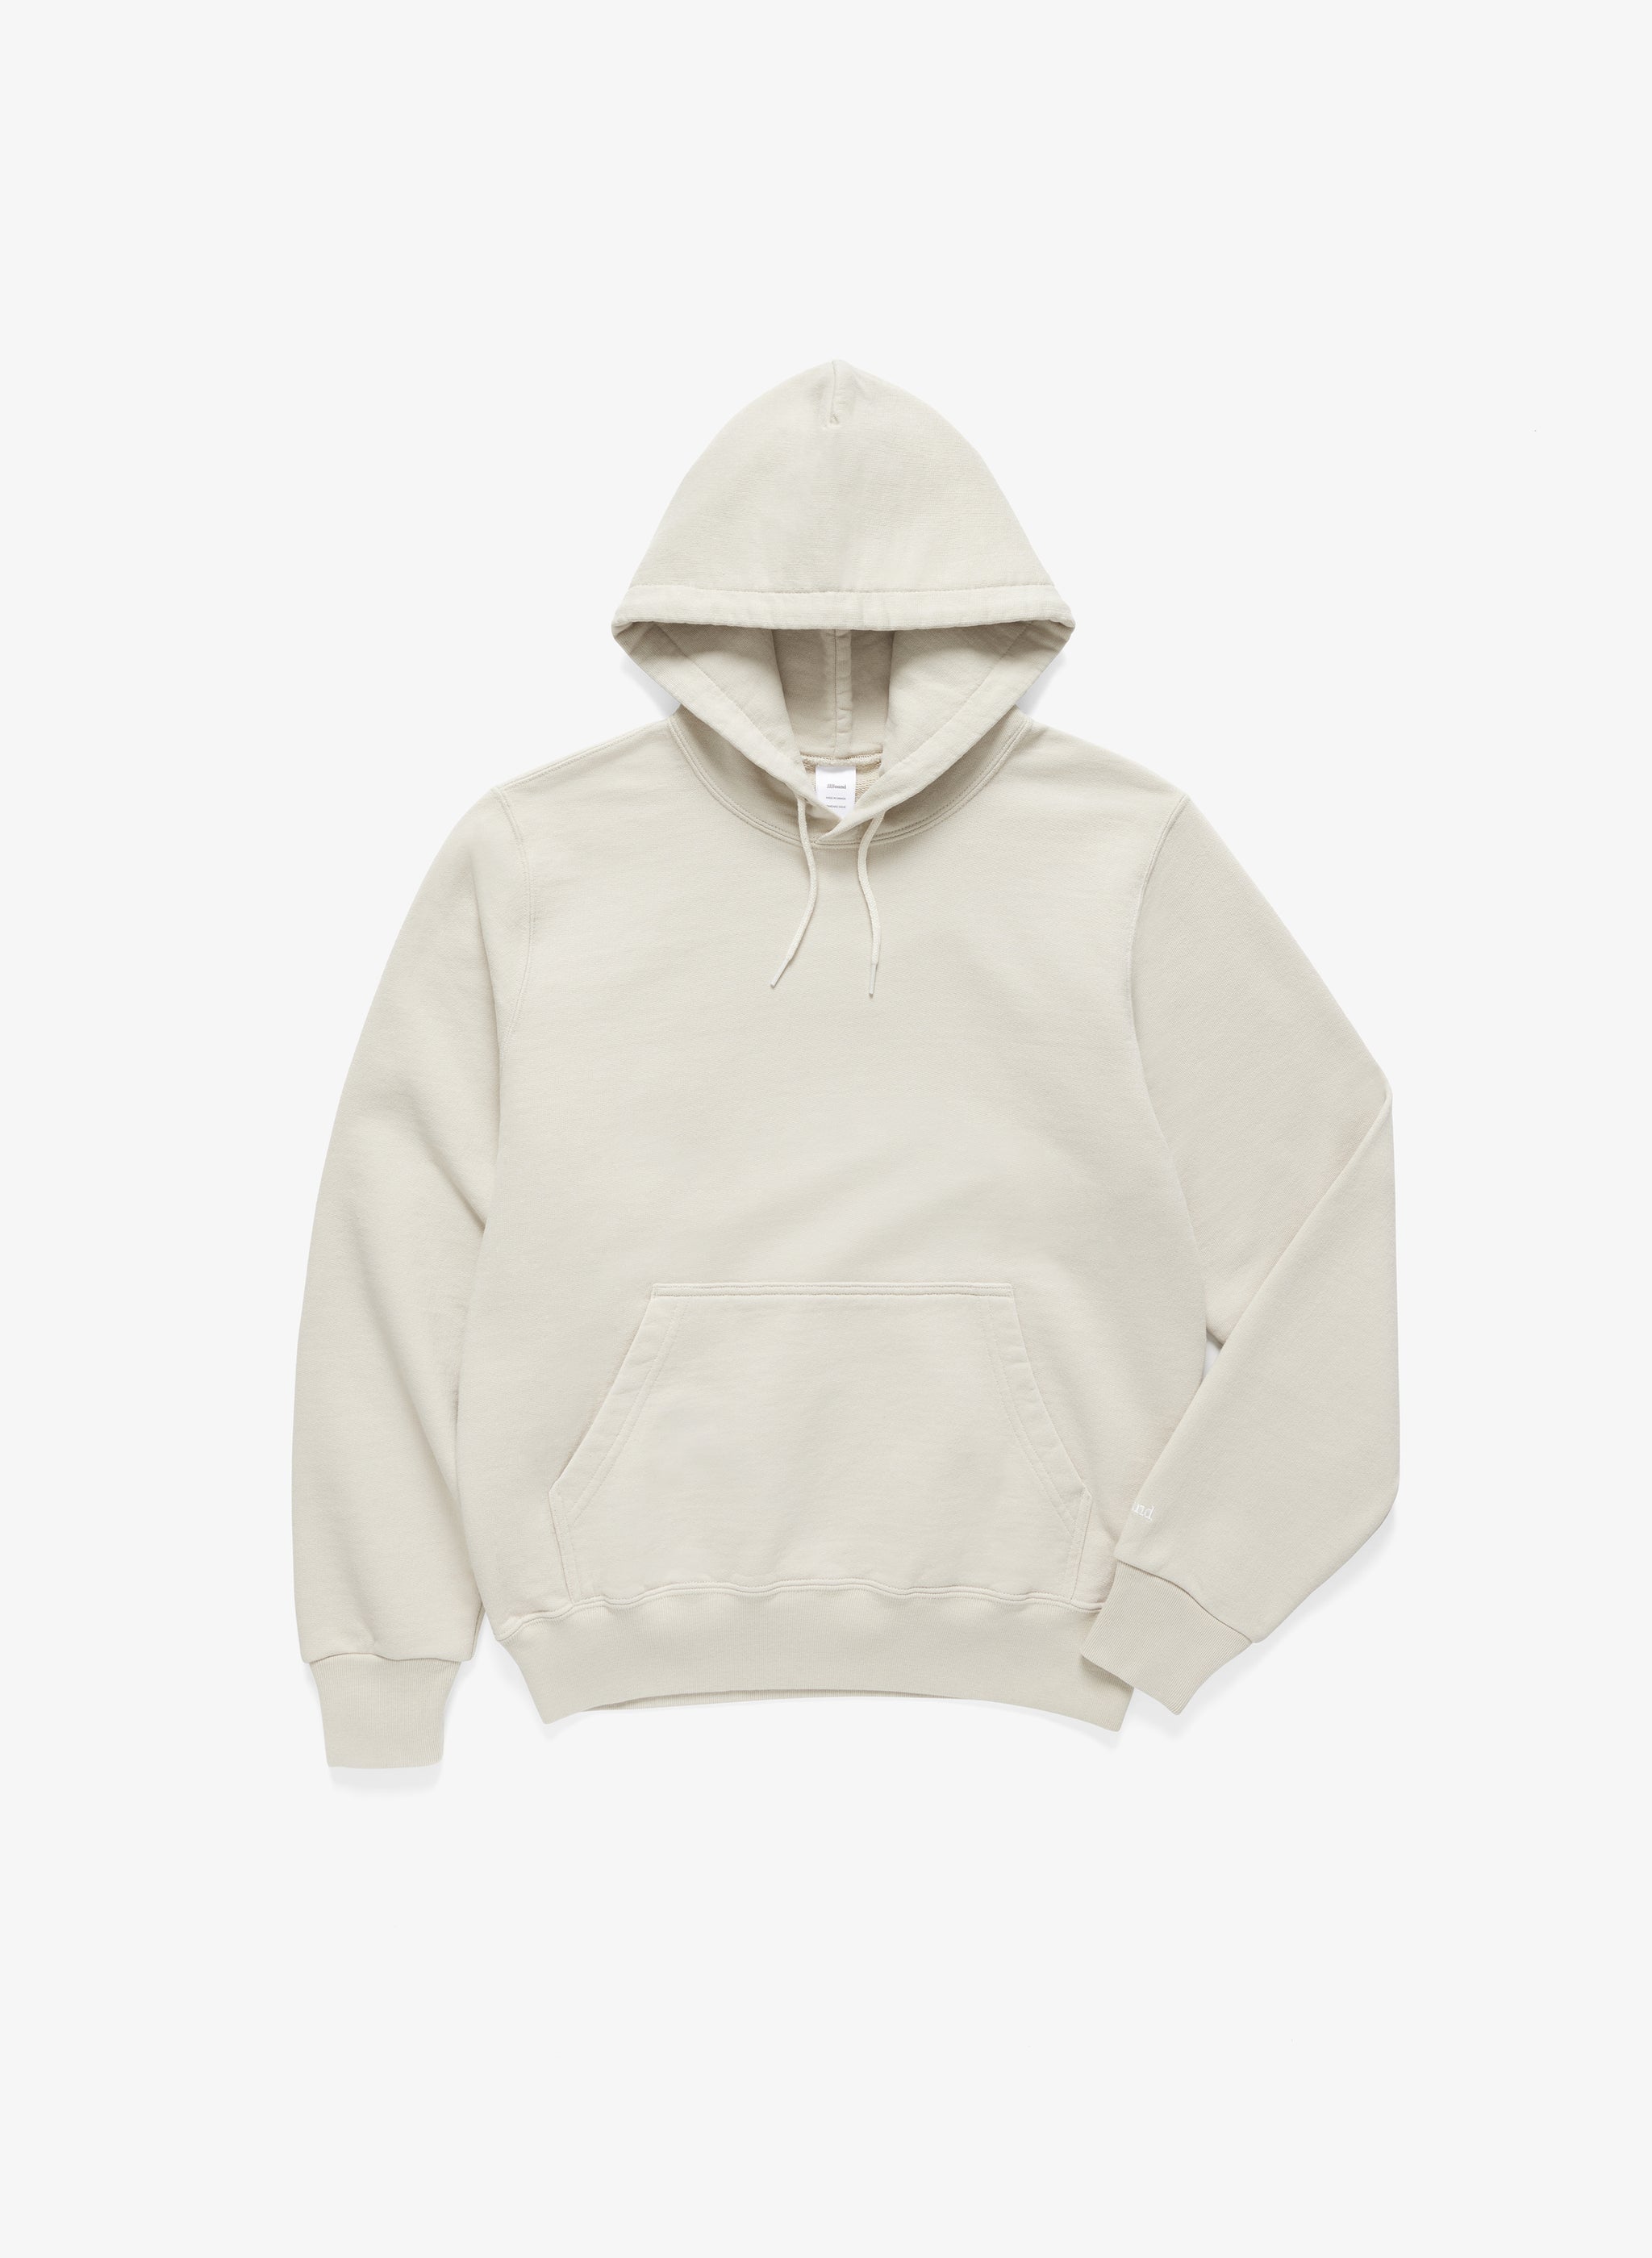 J90 Hoodie - Tan French Terry